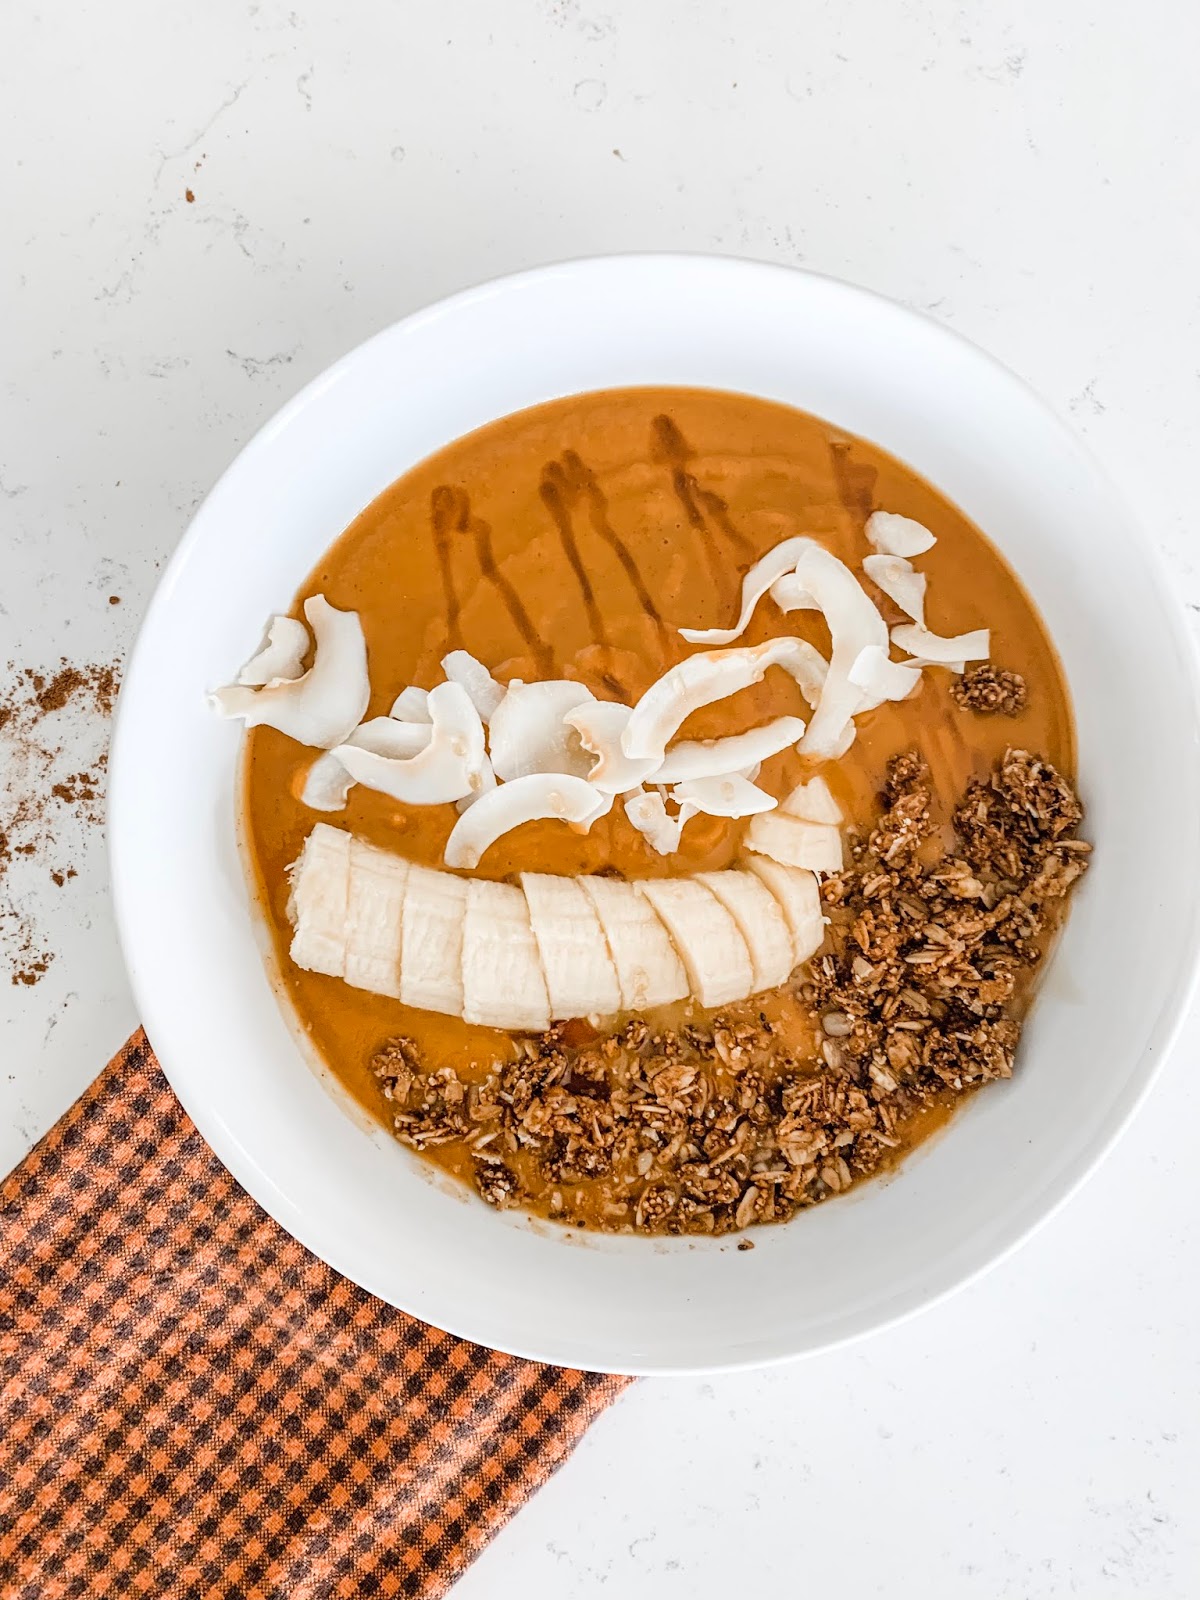 clean juice pumpkin smoothie, clean juice, pumpkin smoothie bowl, fall smoothie bowl, smoothie bowl, sweet potato smoothie bowl, fall recipes, october recipes, filling smoothie, quick and easy smoothies, the best smoothie ever, the best smoothie bowl ever, pumpkin recipes, pumpkin breakfast recipe